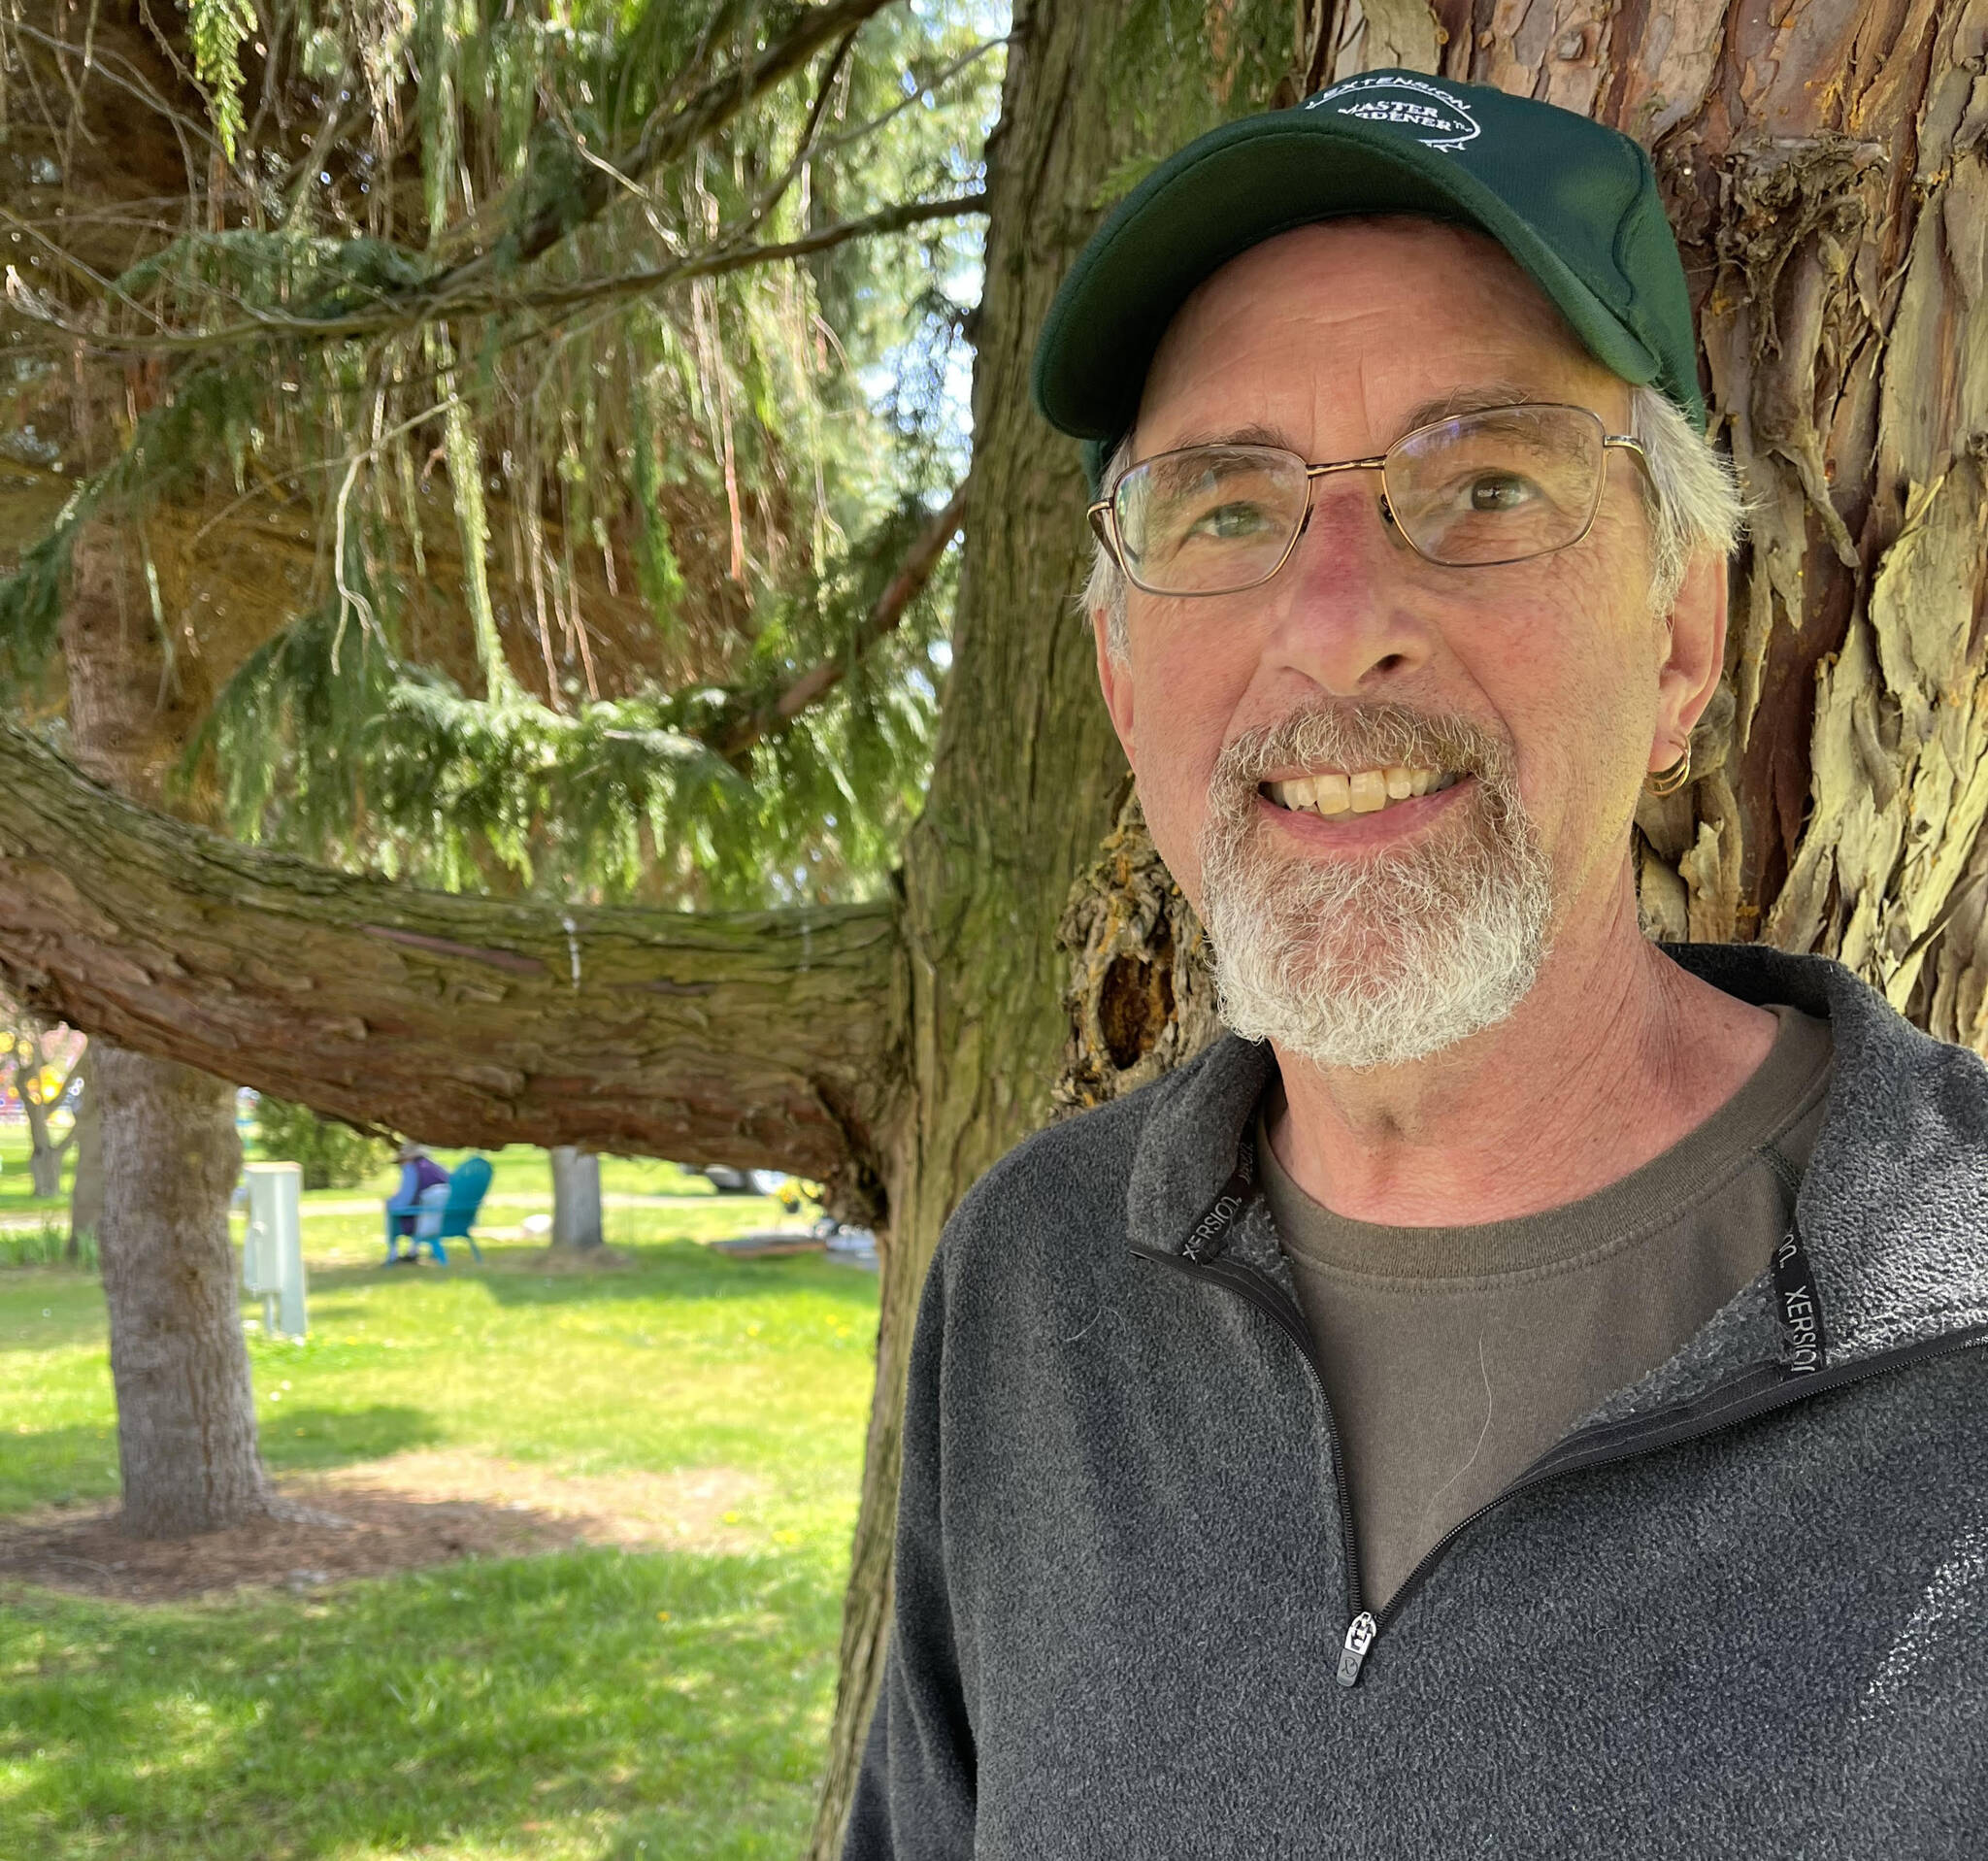 Clallam County Master Gardener Keith Dekker will give the presentation “The Art and Science of Pruning Japanese Maples,” on Thursday. (Keith Dekker)